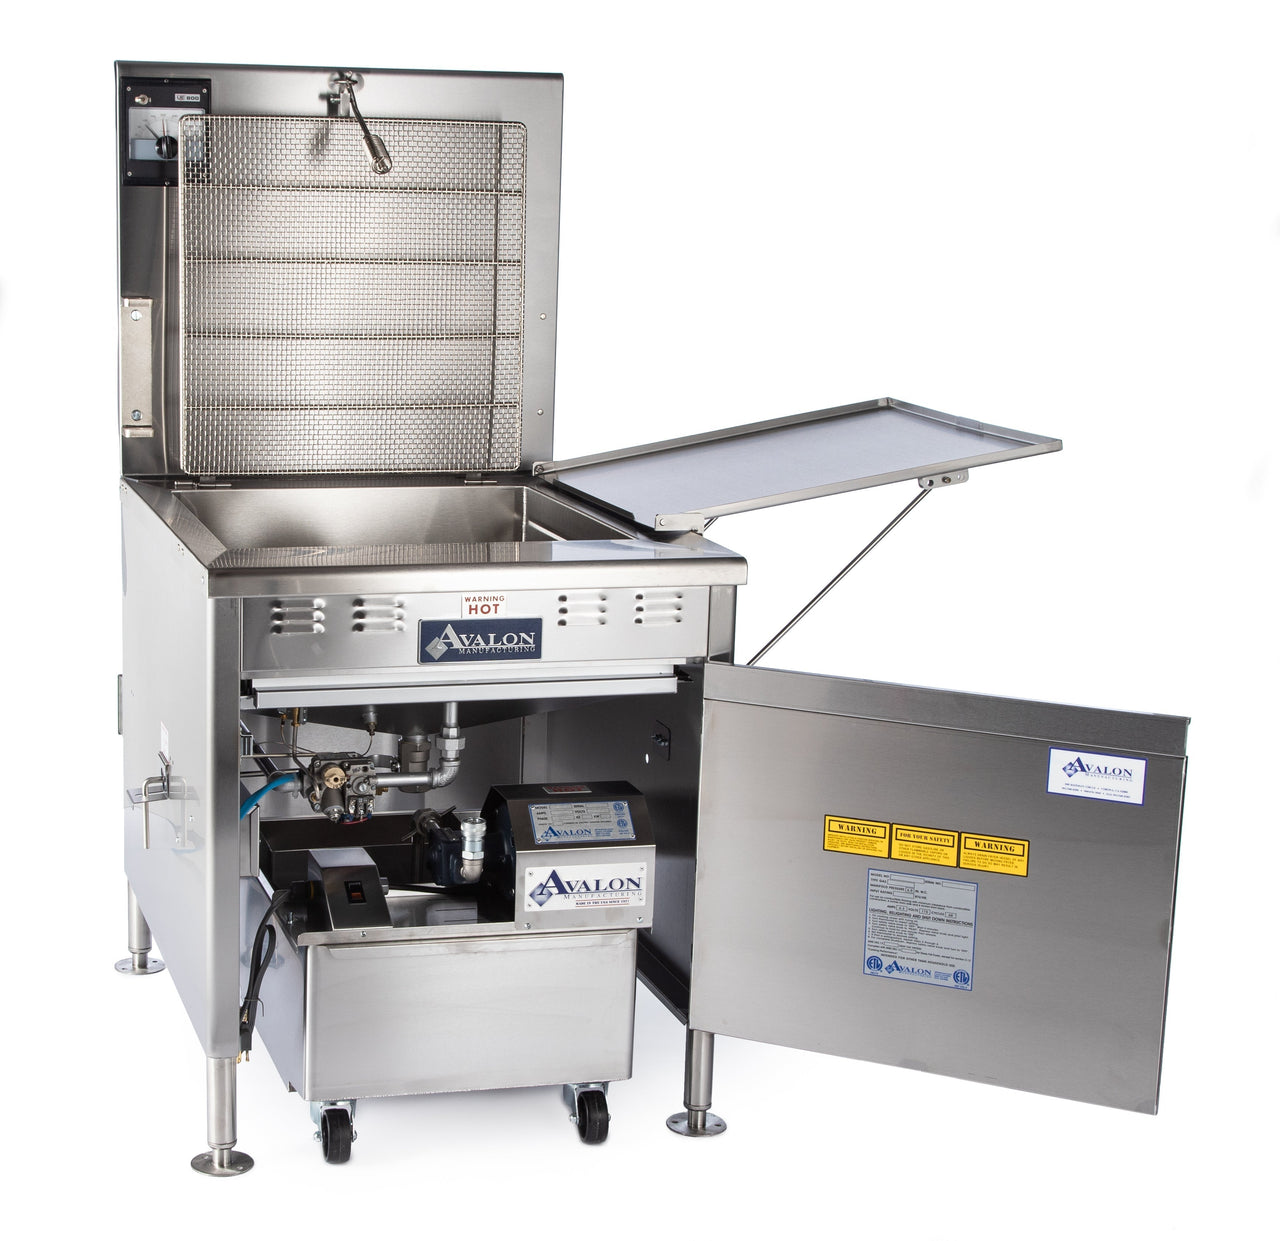 Avalon 18" x 26" Donut Fryer, Natural Gas, Electronic Ignition, Left Side Drain Board